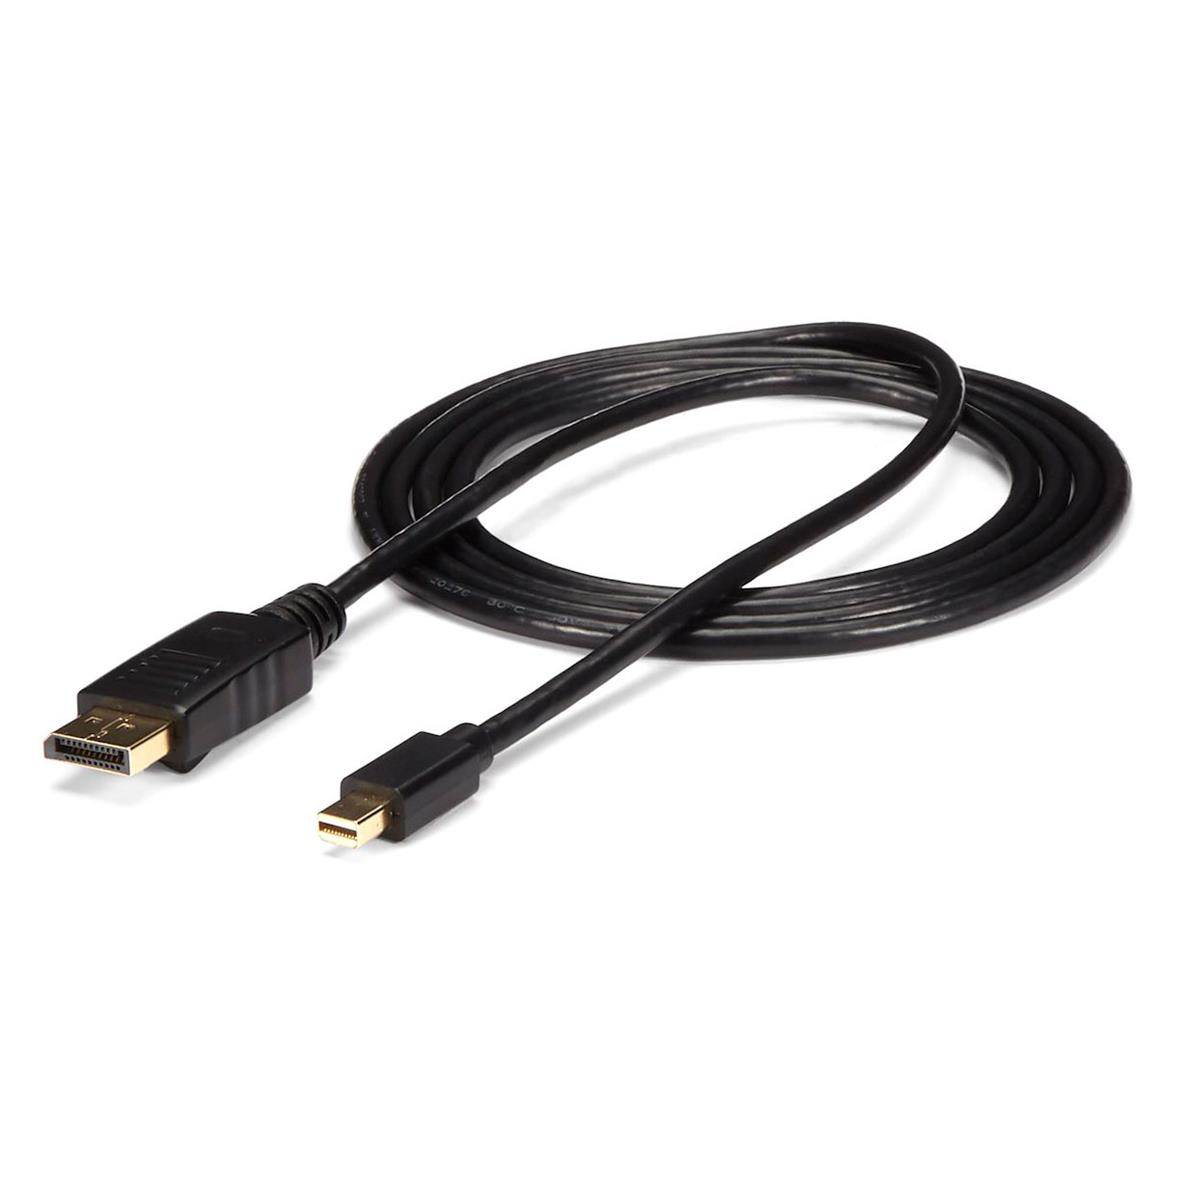 Photos - Cable (video, audio, USB) Startech.com StarTech 6 ft Mini DisplayPort to DisplayPort 1.2 Adapter Cable Male/Male 